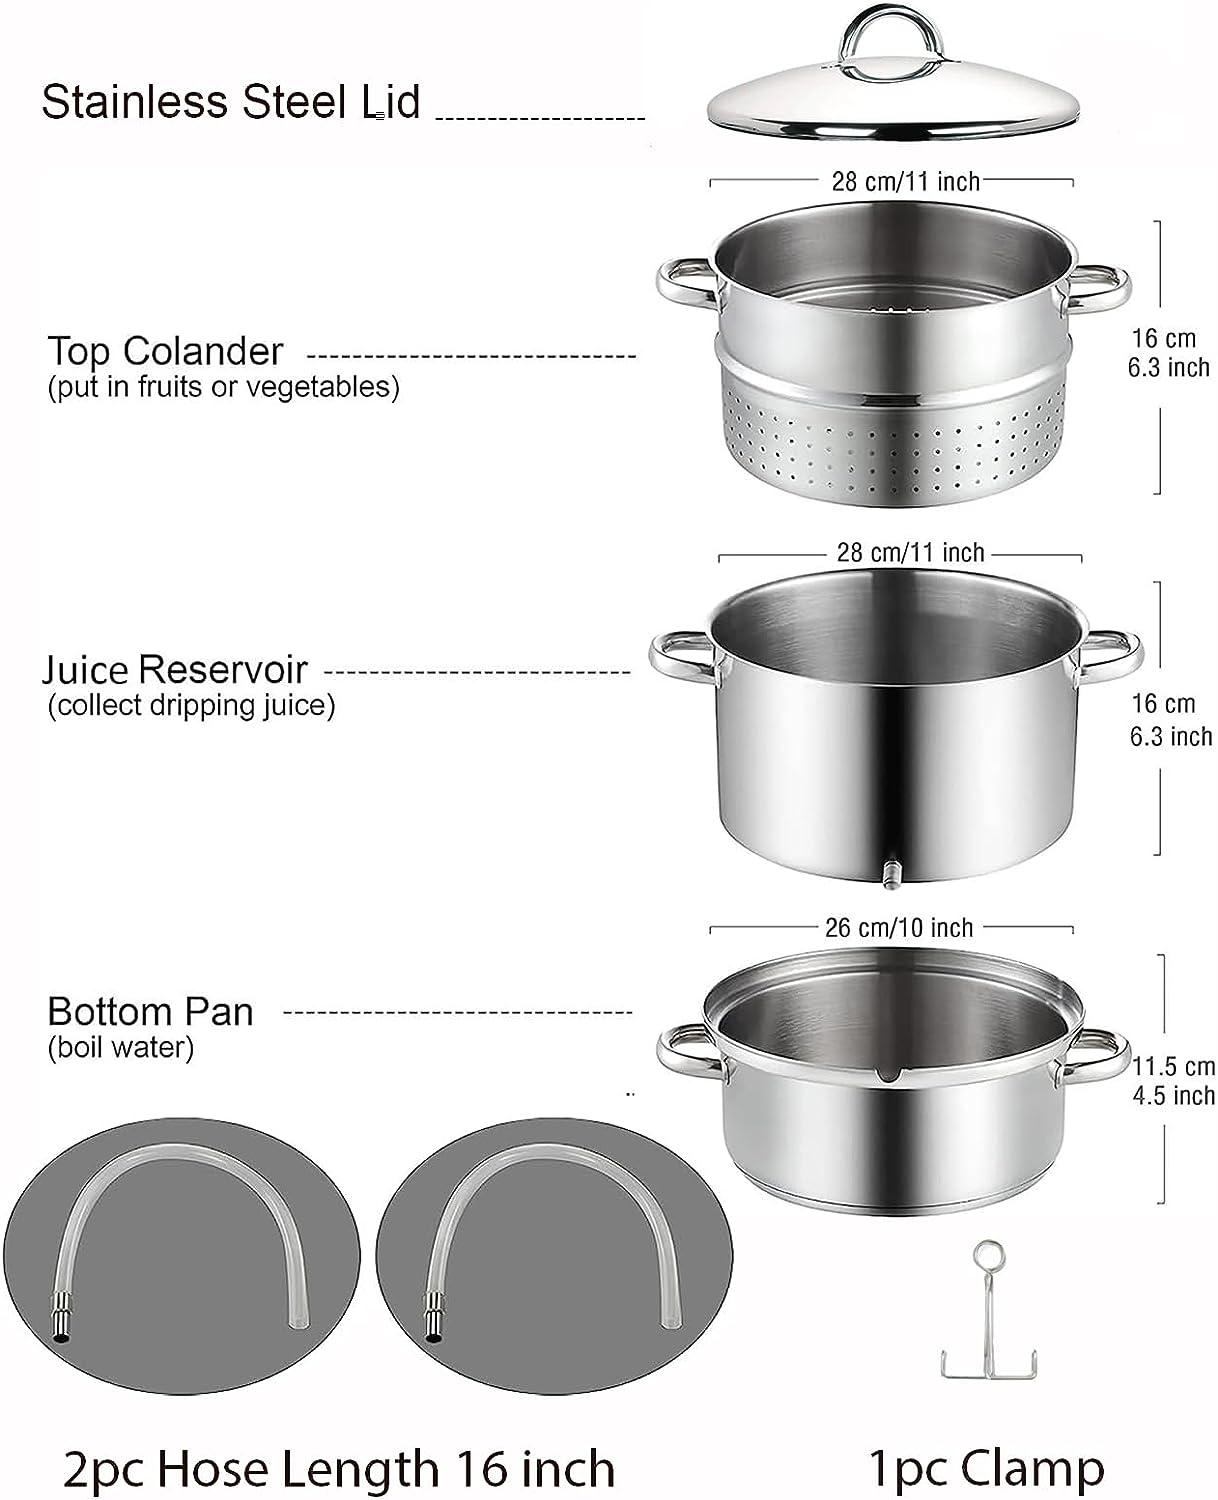 Cook N Home 1 Quart Stainless Steel Sauce Pan with Lid